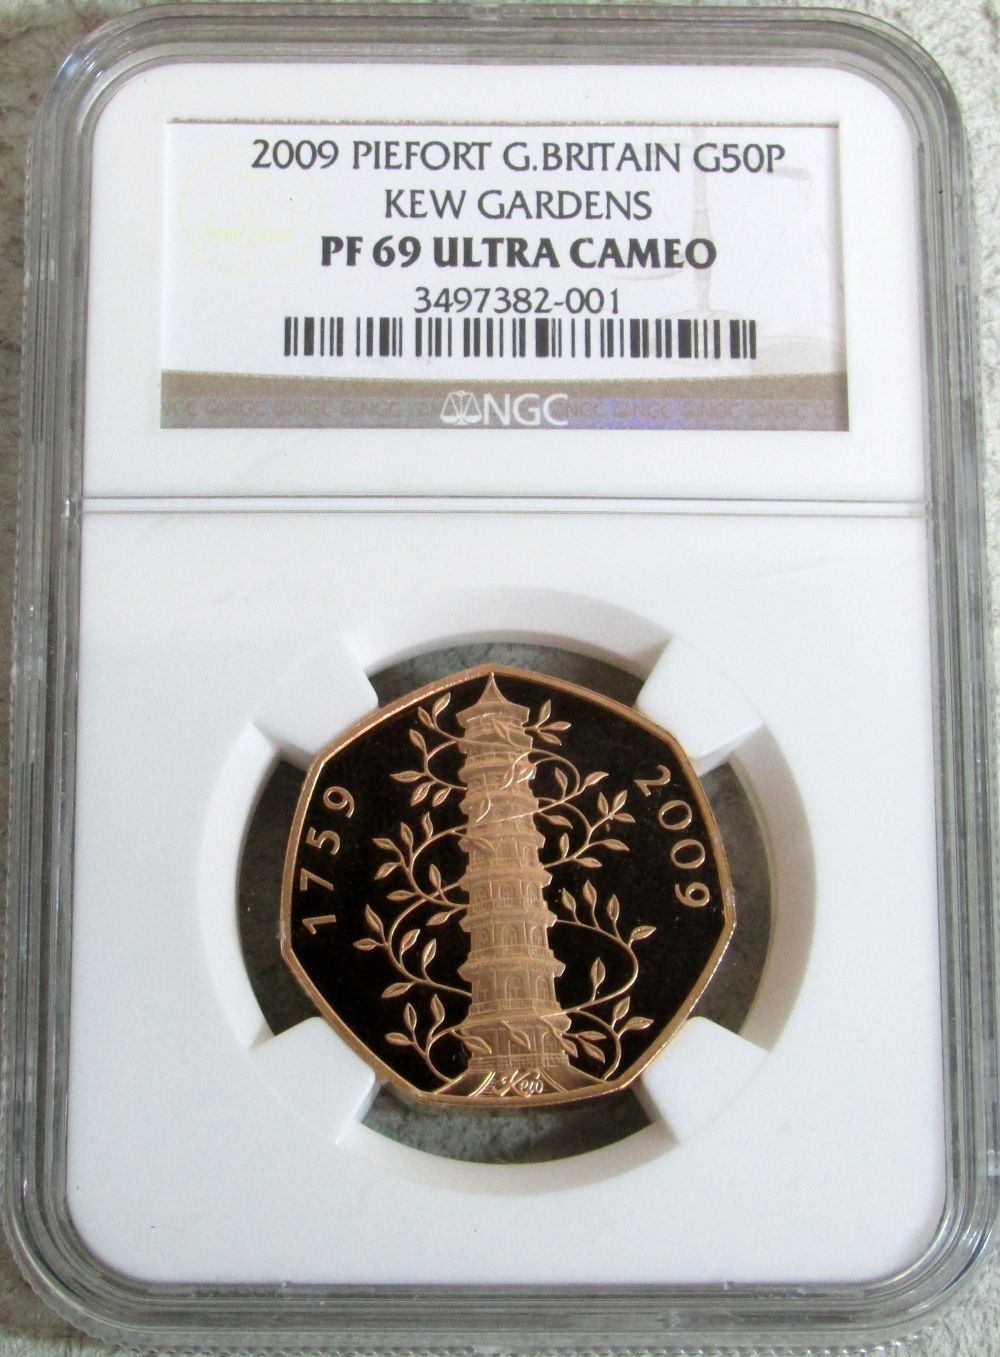 2009 GOLD GREAT BRITAIN PIEFORT NGC PROOR 69 ULTRA CAMEO "KEW GARDENS" ONLY 40 COINS MINTED